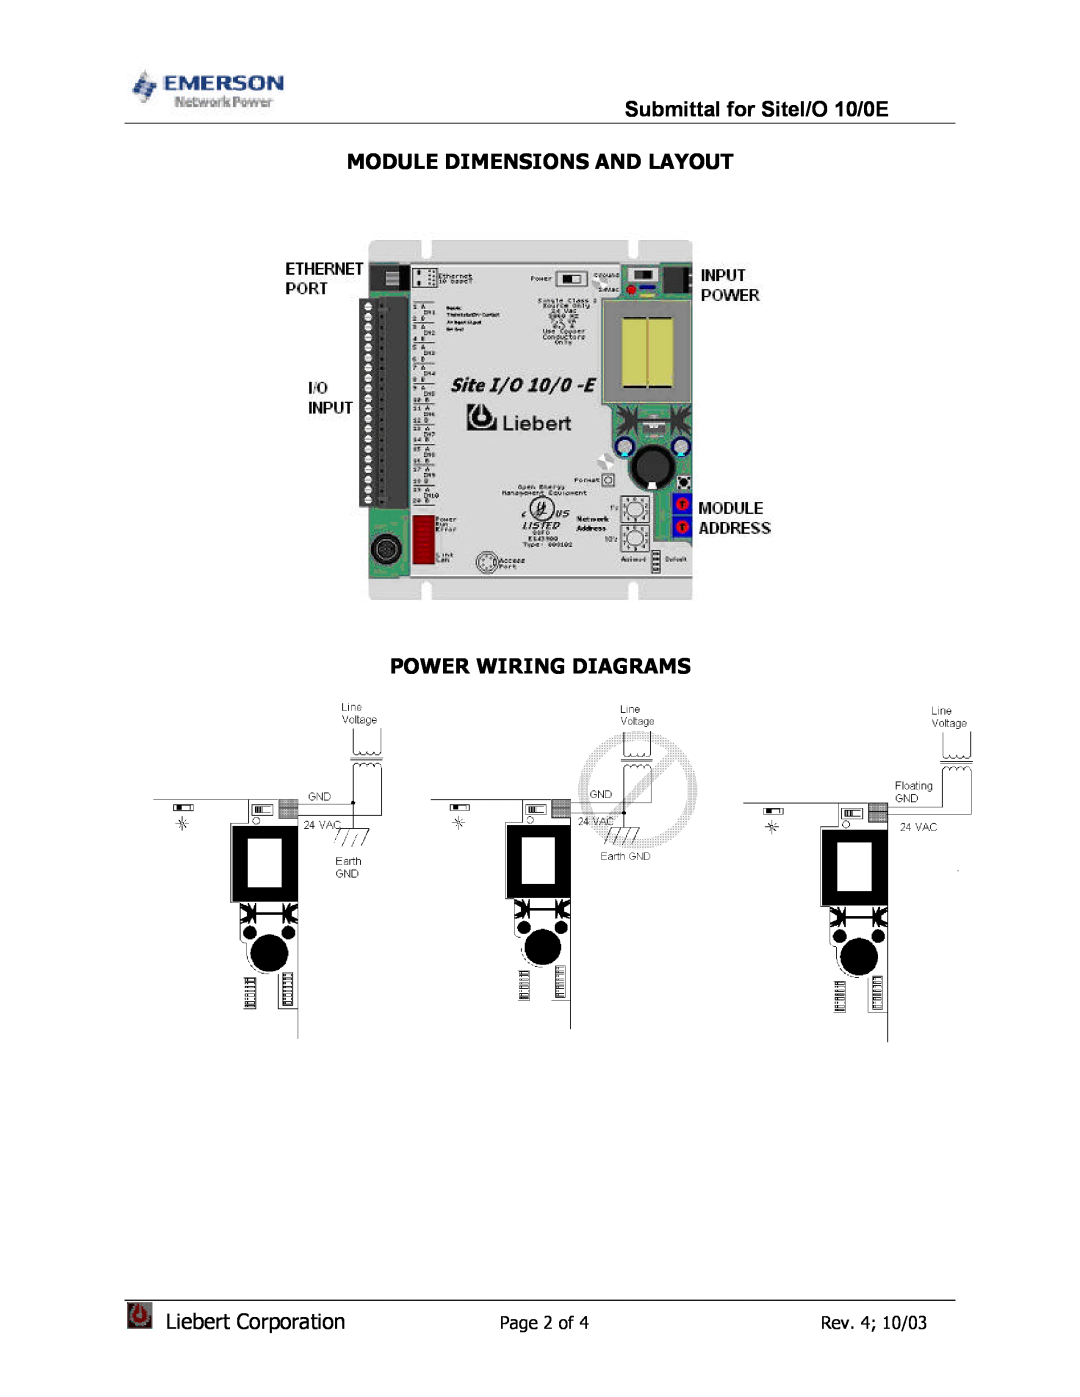 Emerson Network Power Module Dimensions And Layout, Power Wiring Diagrams, Submittal for SiteI/O 10/0E, Page 2 of 